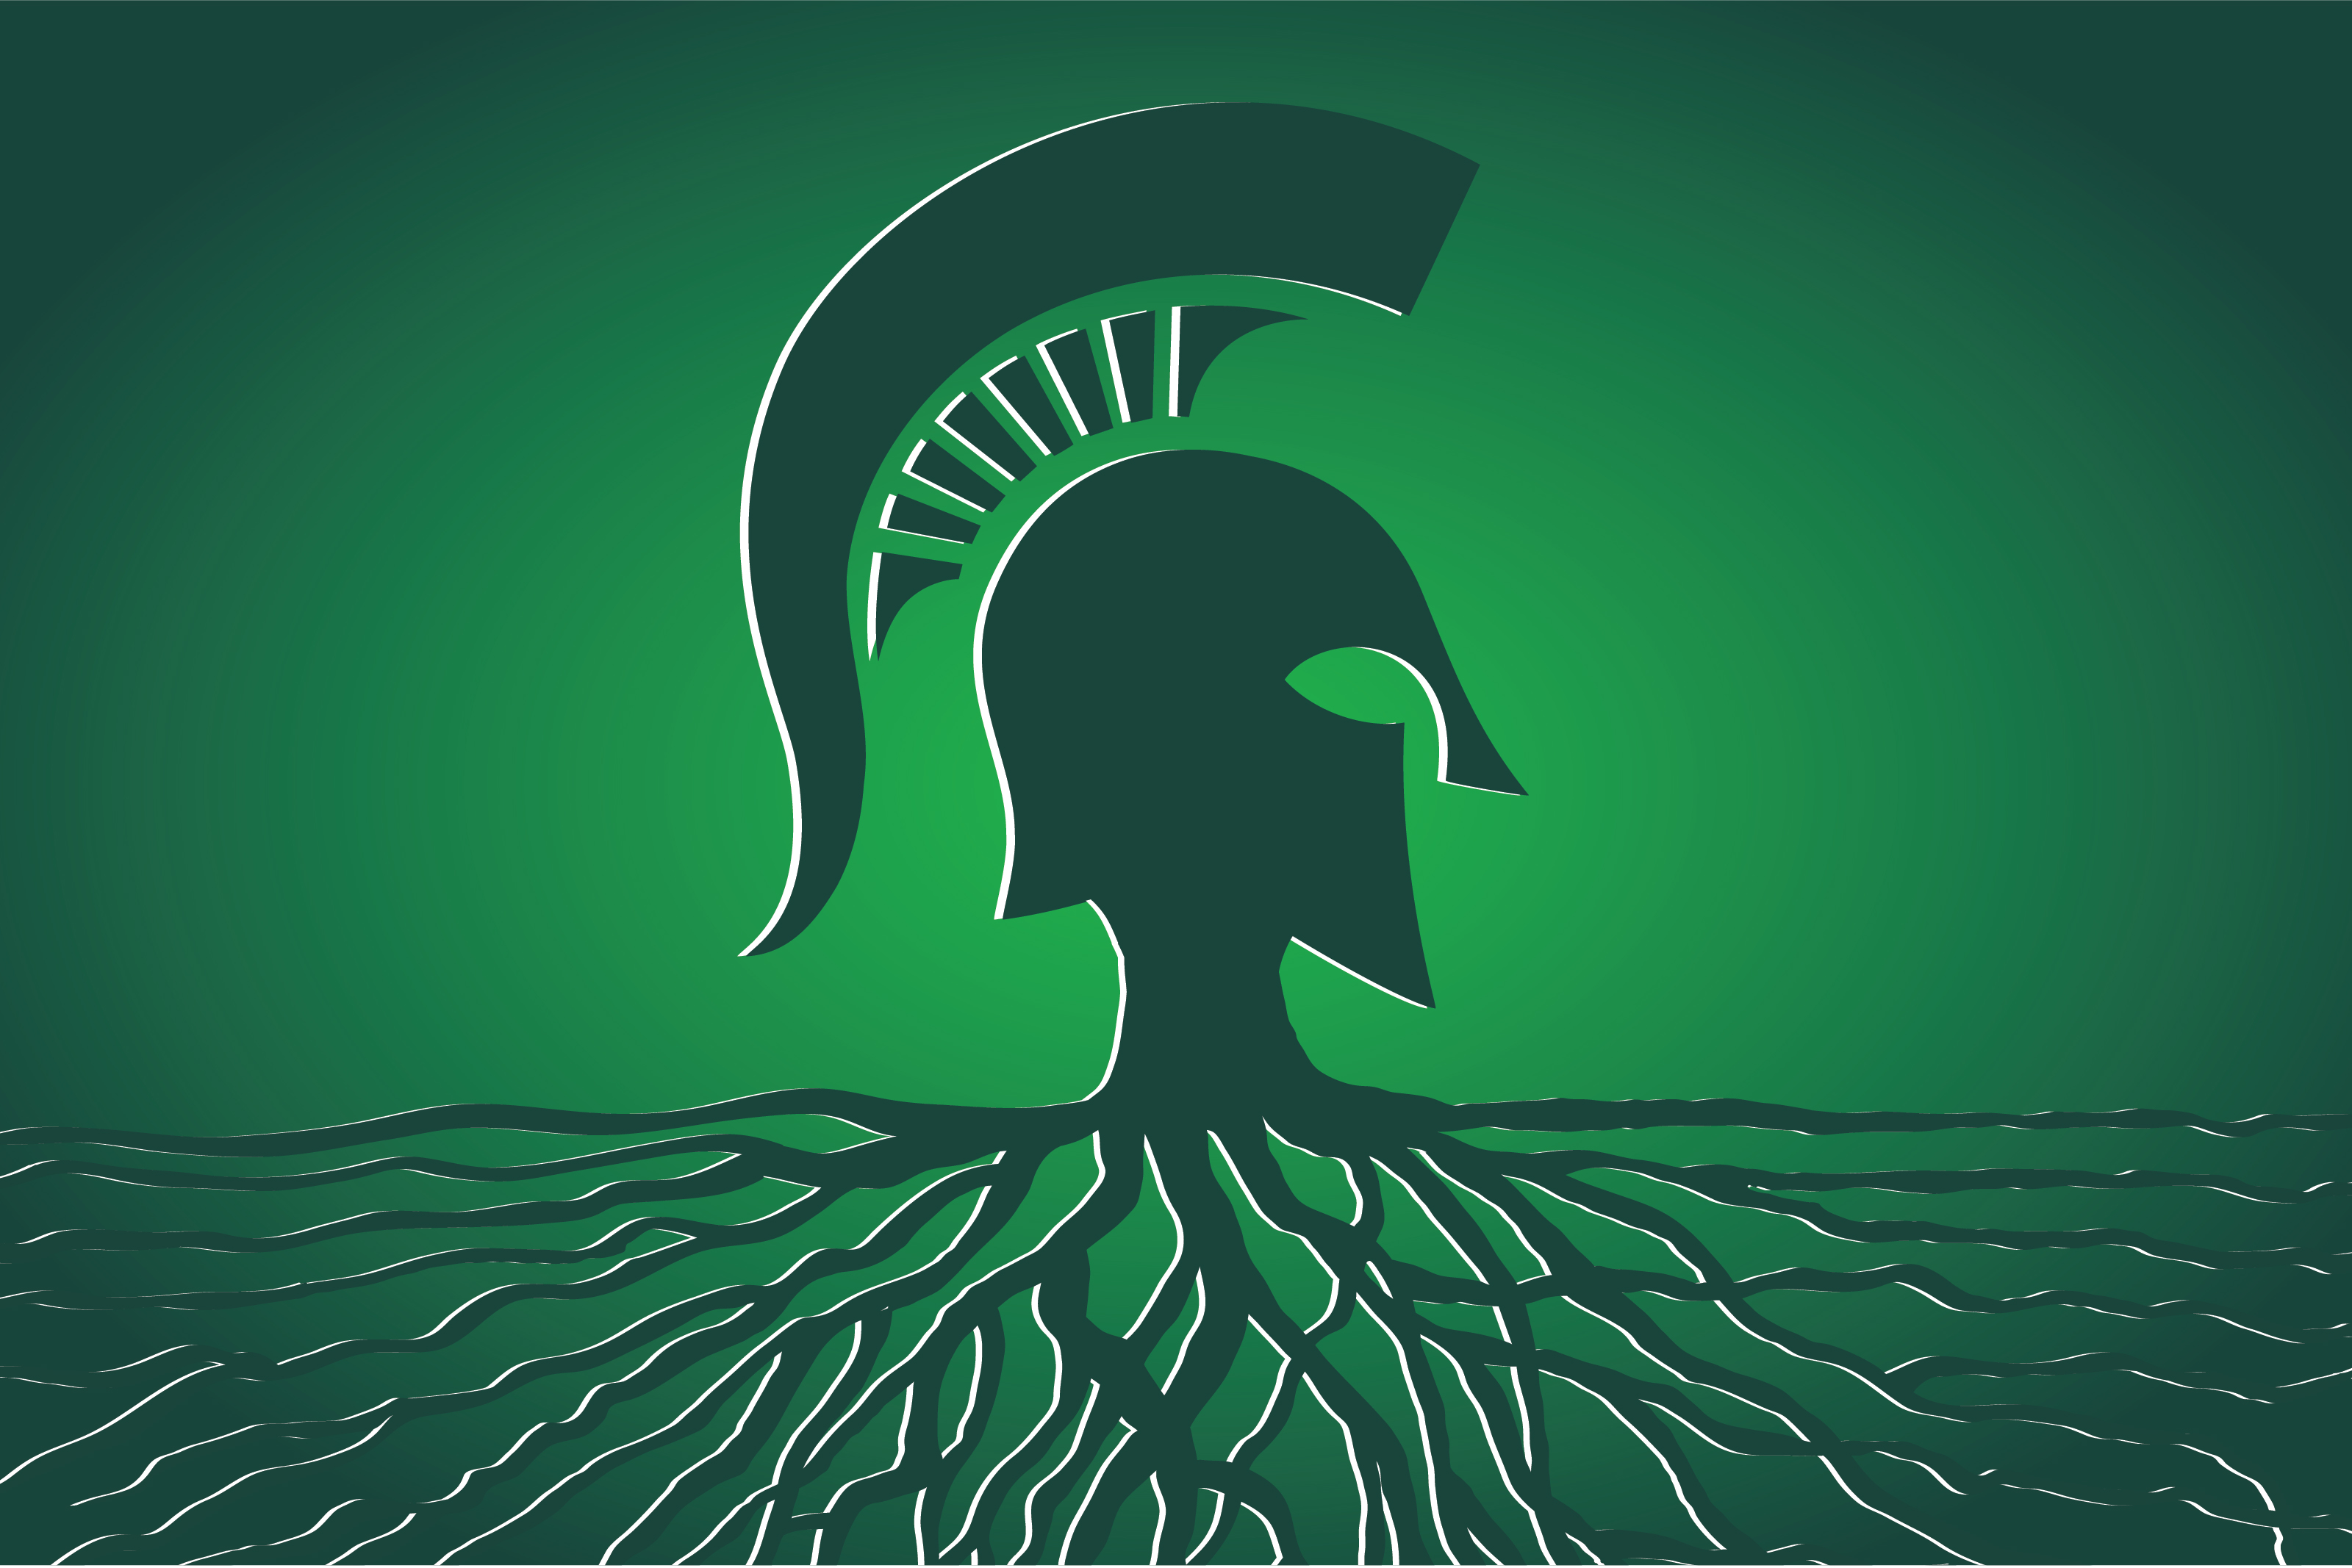 Sparty head.